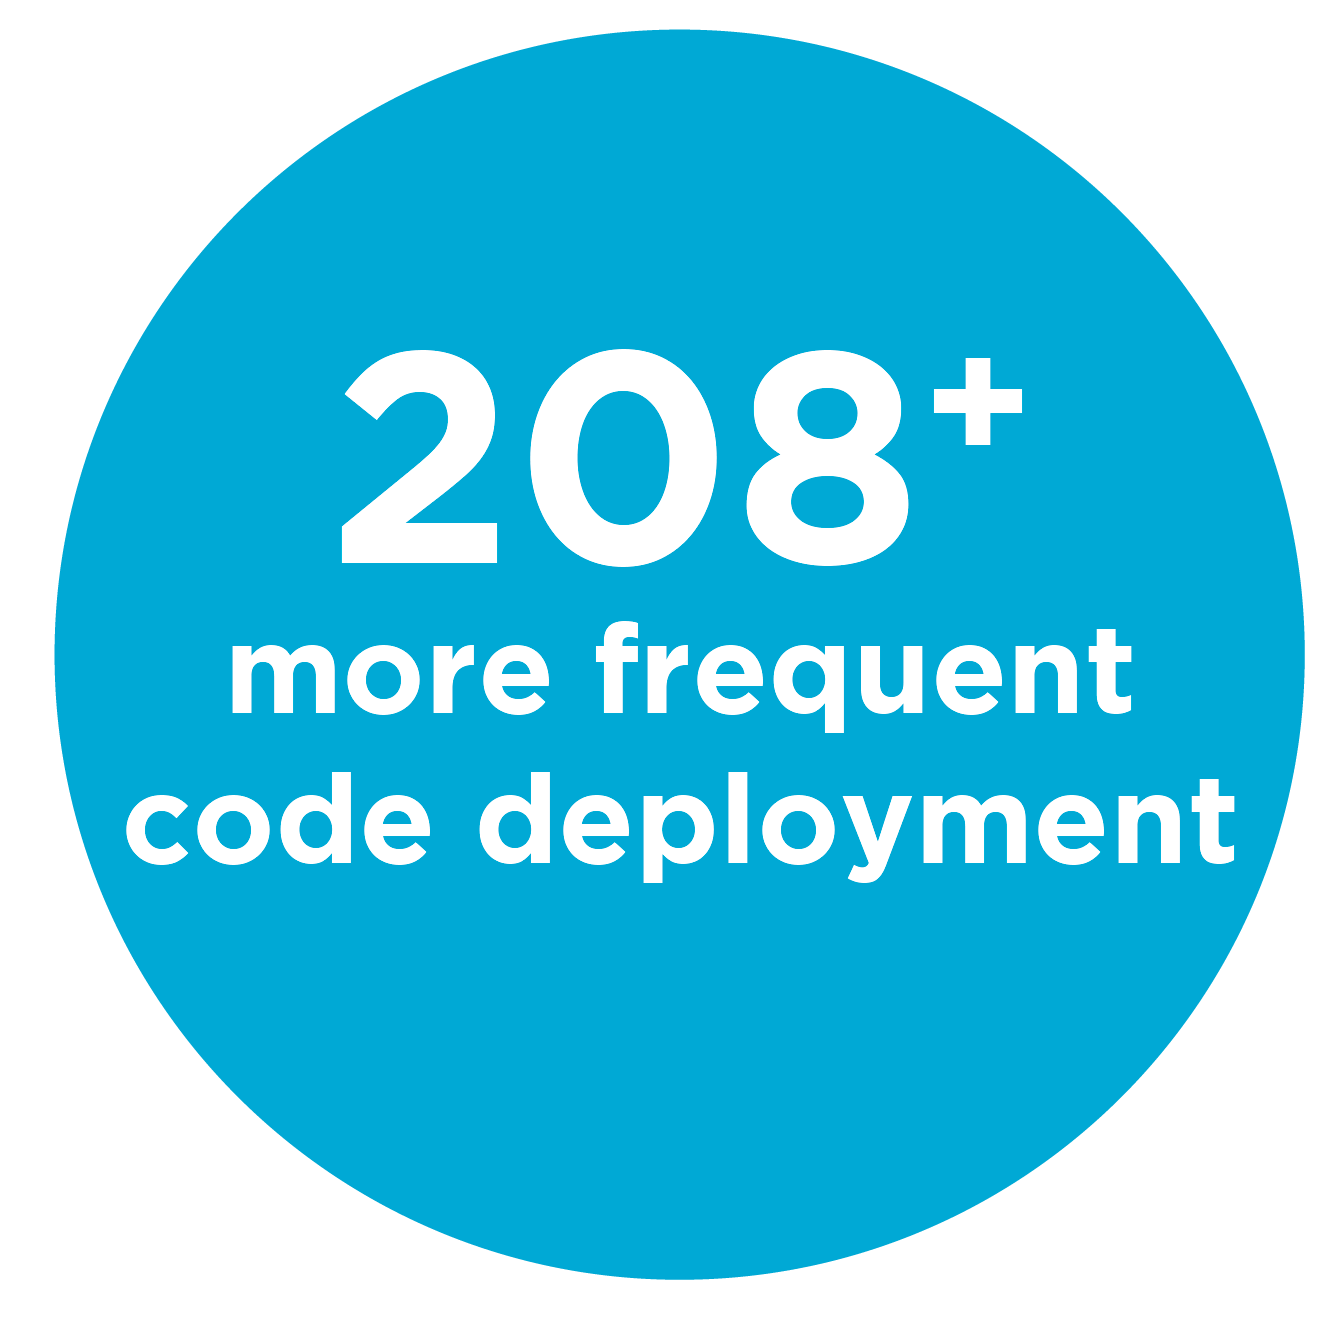 20% DBA performers have 208x more frequent code deployments